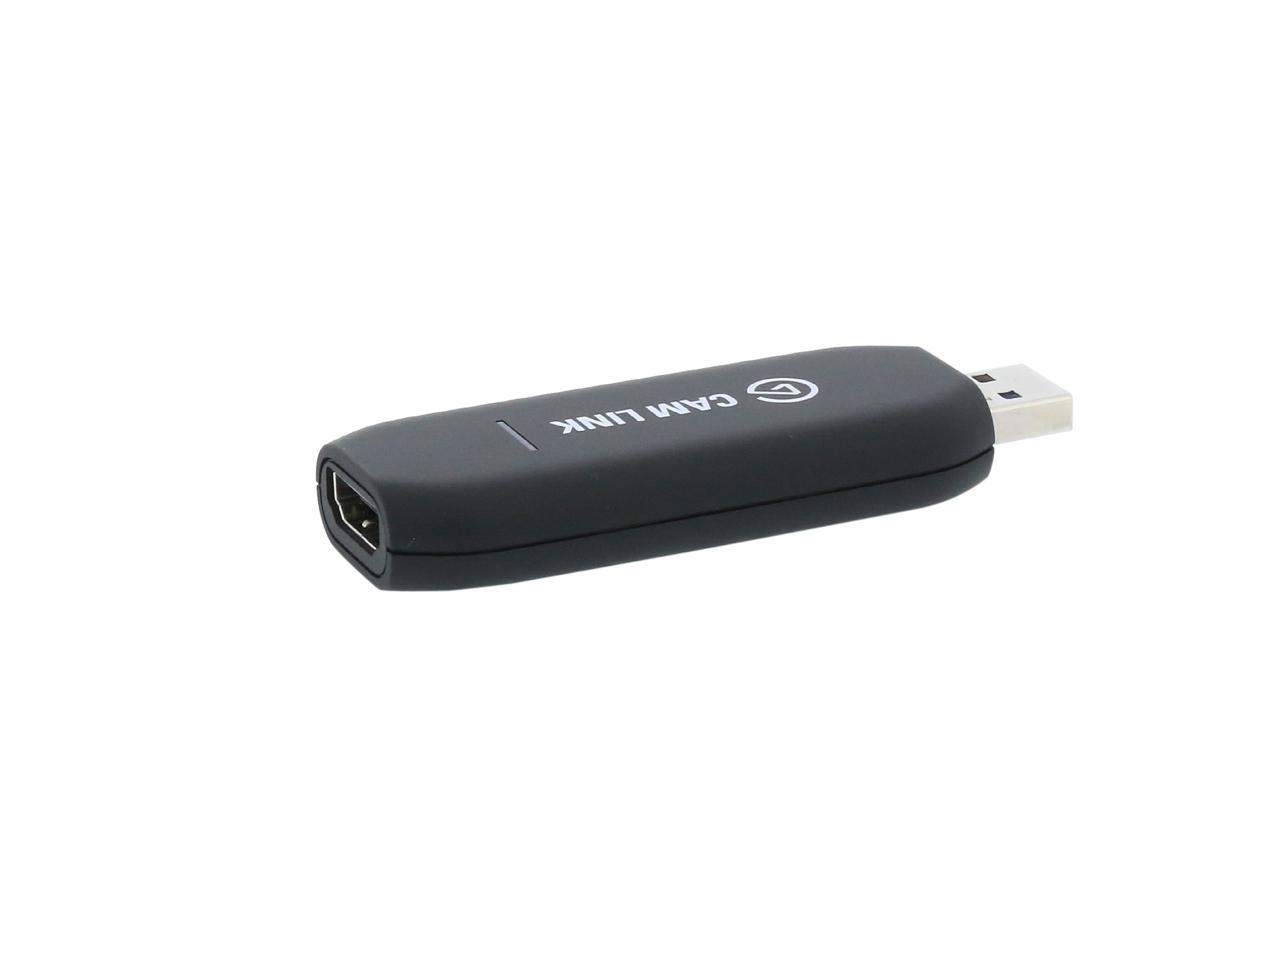 Open Box Elgato Cam Link Broadcast Live And Record Via Dslr Camcorder Or Action Cam In 1080p 60 Fps Compact Hdmi Capture Device Usb 3 0 Newegg Com